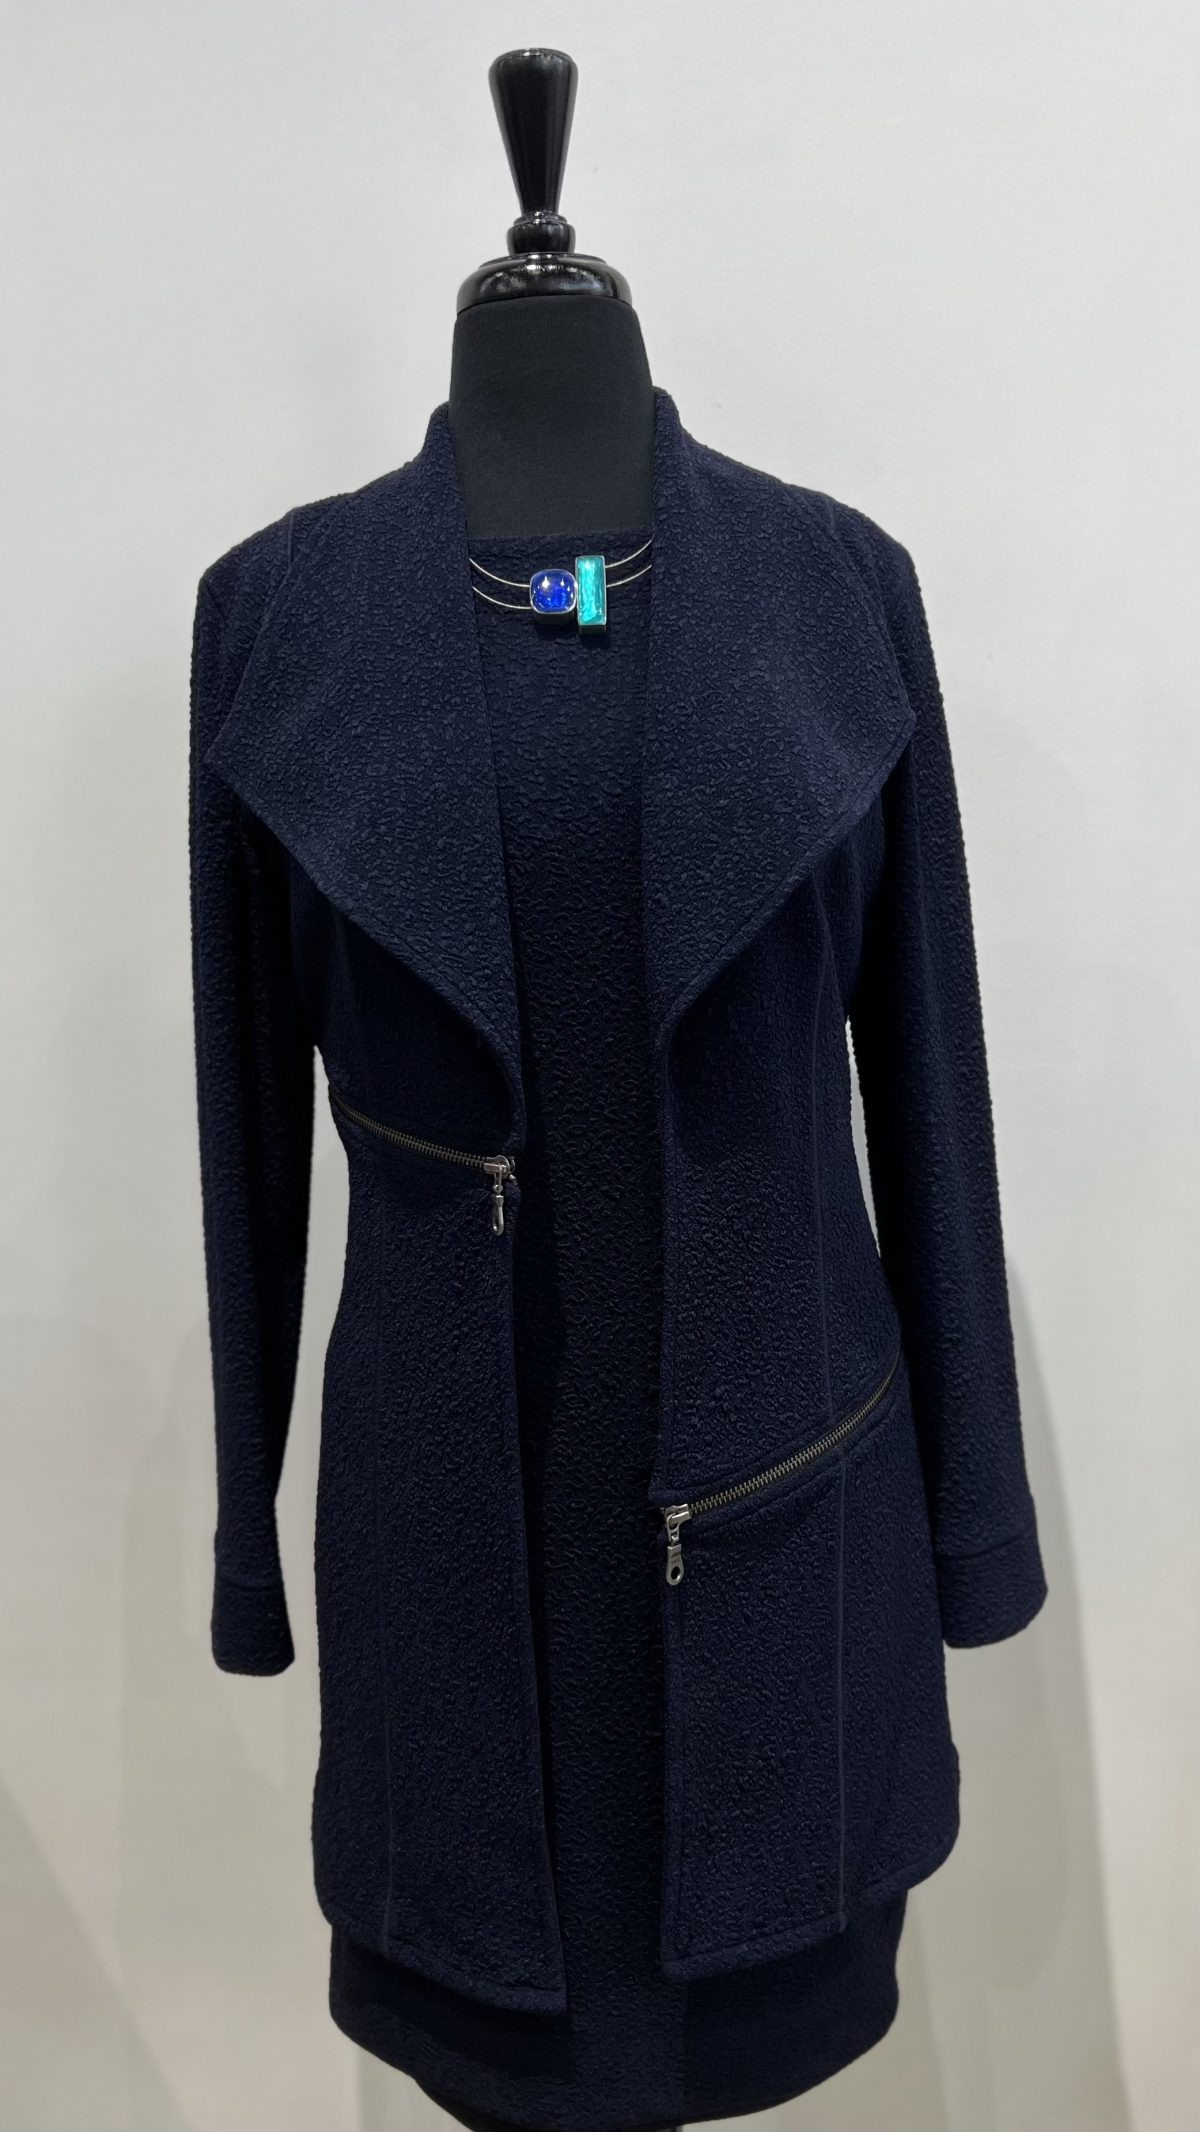 Eva Varro J12901 Navy Long Barcelona Jacket with Zipper Detail | Ooh Ooh Shoes women's clothing and shoe boutique located in Naples